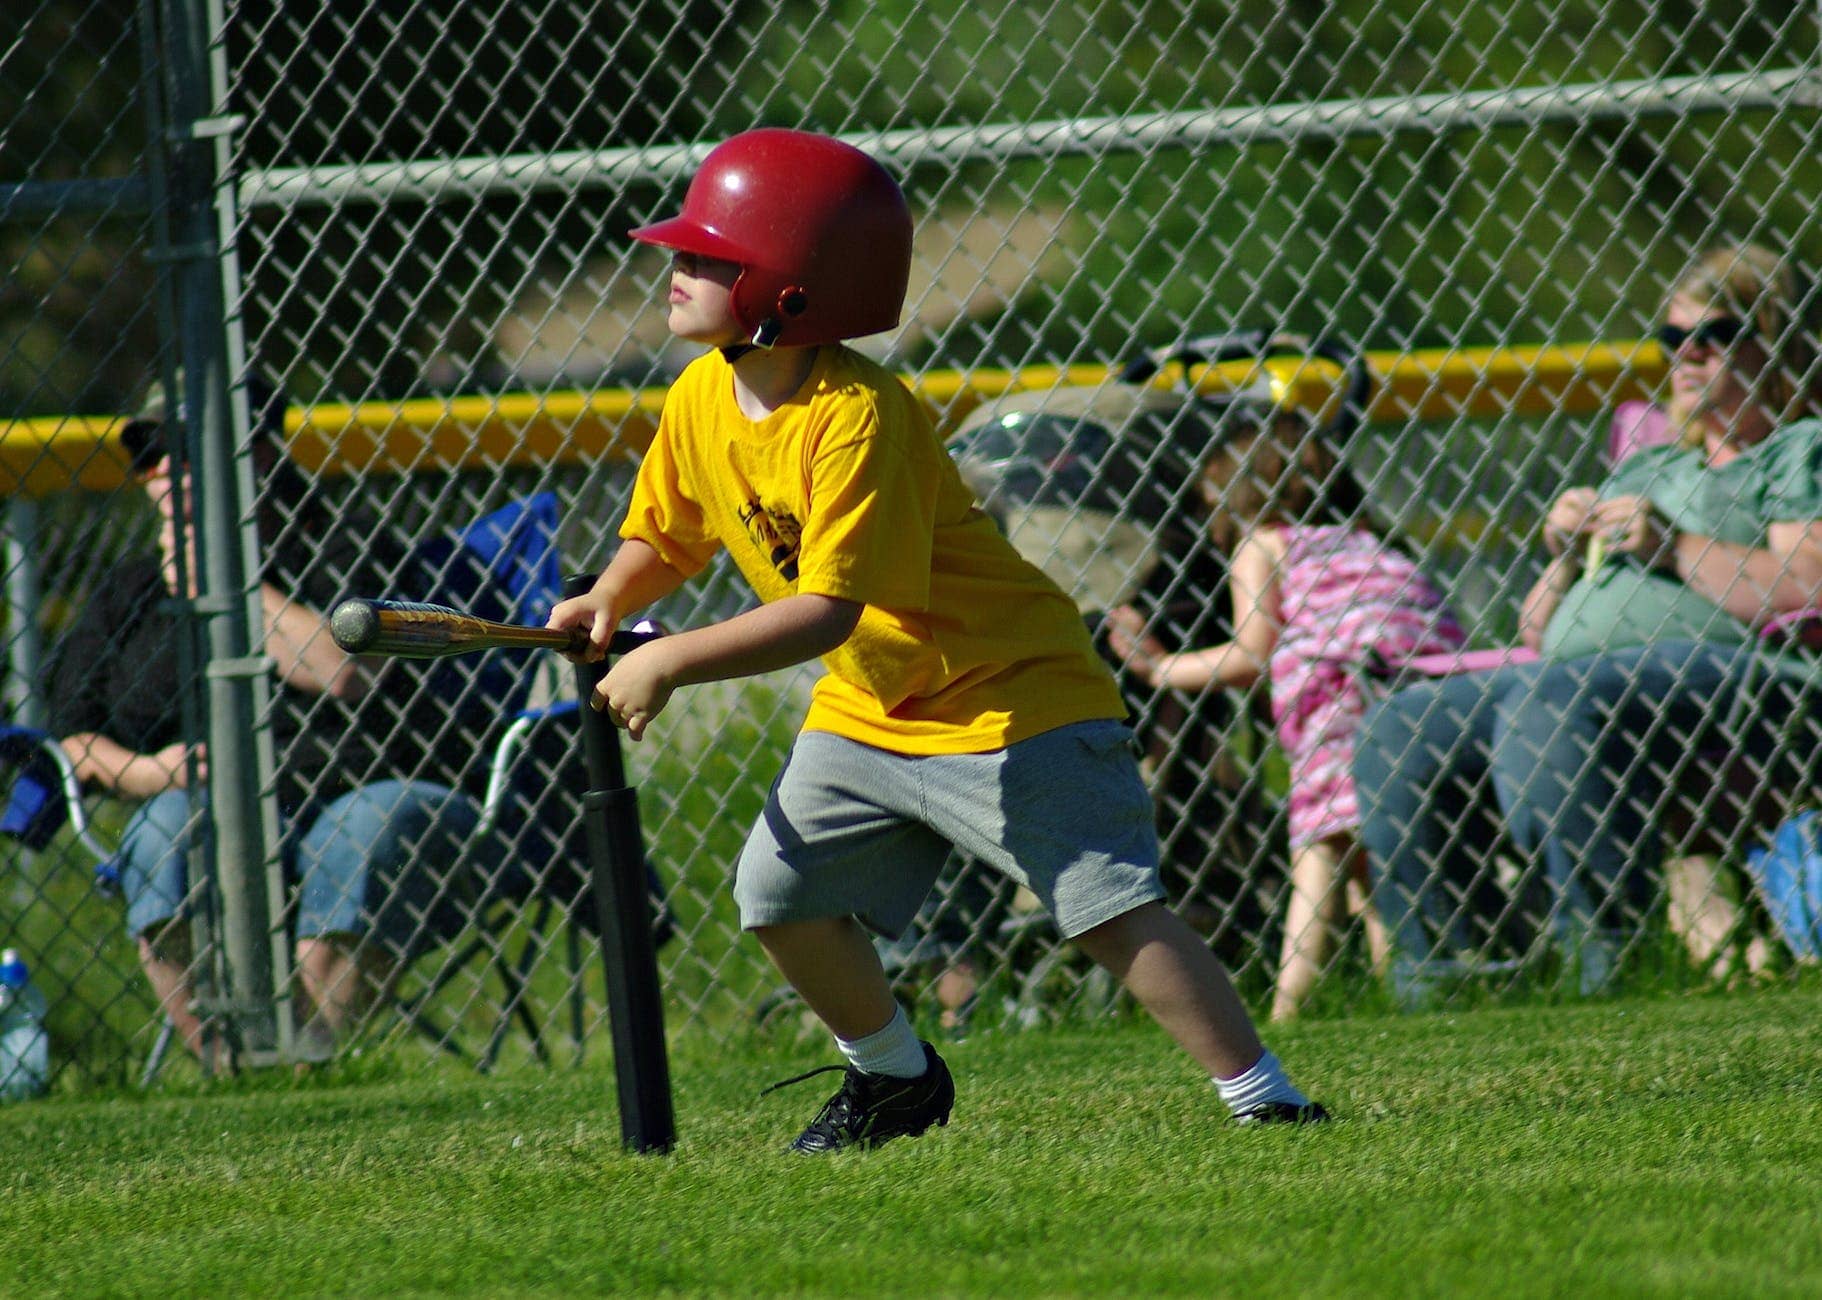 a young boy in yellow shirt wearing a red batting helmet while playing baseball